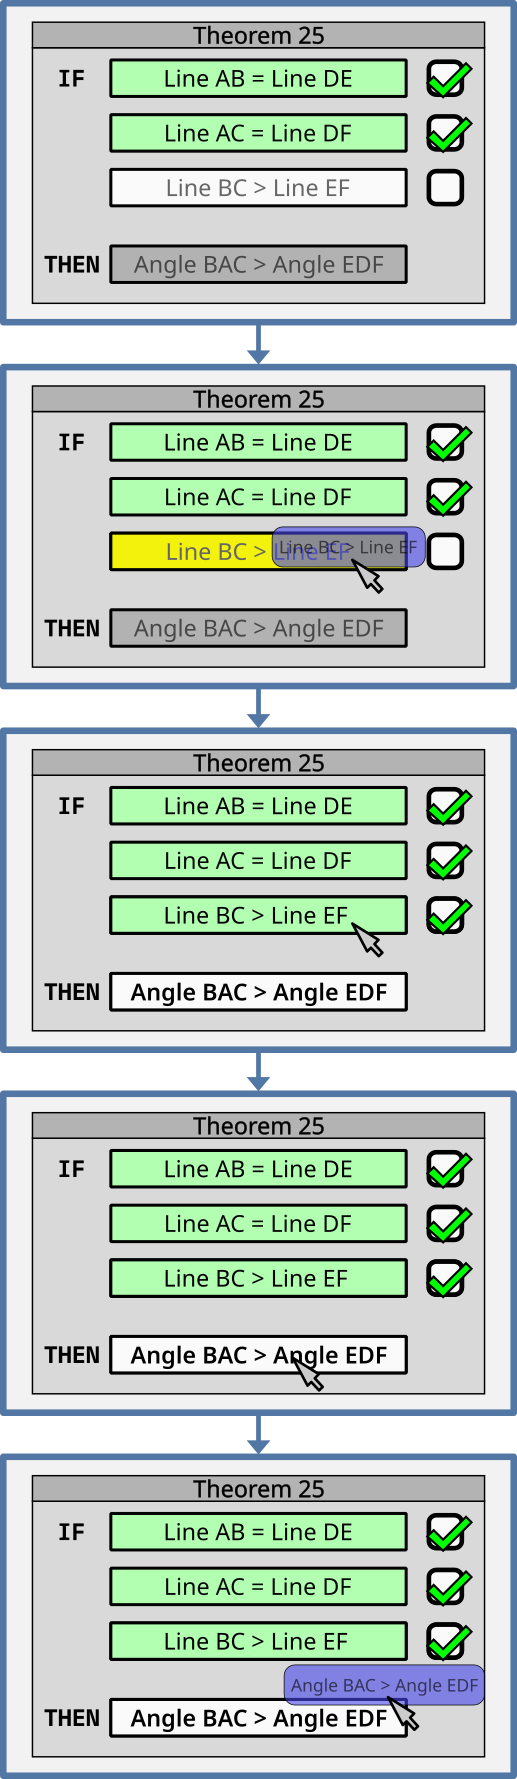 Picture of sequential frames of the game, in which the player interacts with a pim. The pim is labeled "Theorem 25" at its top. Frame 1: The left side has the labels "IF" and "THEN". 3 wide slots are ordered vertically to the right of the label "IF". They read "Line AB = Line DE", "Line AC = Line DF", and "Line BC > Line EF". Below them is 1 wide slot to the right of the label "THEN". It reads "Angle BAC > Angle EDF". Each slot for premises has a checkbox to its right. The first 2 checkboxes are checked off, and the third is not. The first 2 slots are highlighted, and the third is not. The final slot is grayed out. Frame 2: A mouse cursor drags the description "Line BC > Line EF" in a transparent container to the third slot, which has the same description. That slot is highlighted in a different color from the rest. Frame 3: The transparent container is gone. The third slot looks like the 2 slots above it while keeping its description, and its checkbox is checked off. The final slot is no longer grayed out. Frame 4: The mouse cursor hovers over the final slot. Frame 5: The mouse cursor drags its description "Angle BAC > Angle EDF" in a transparent container.